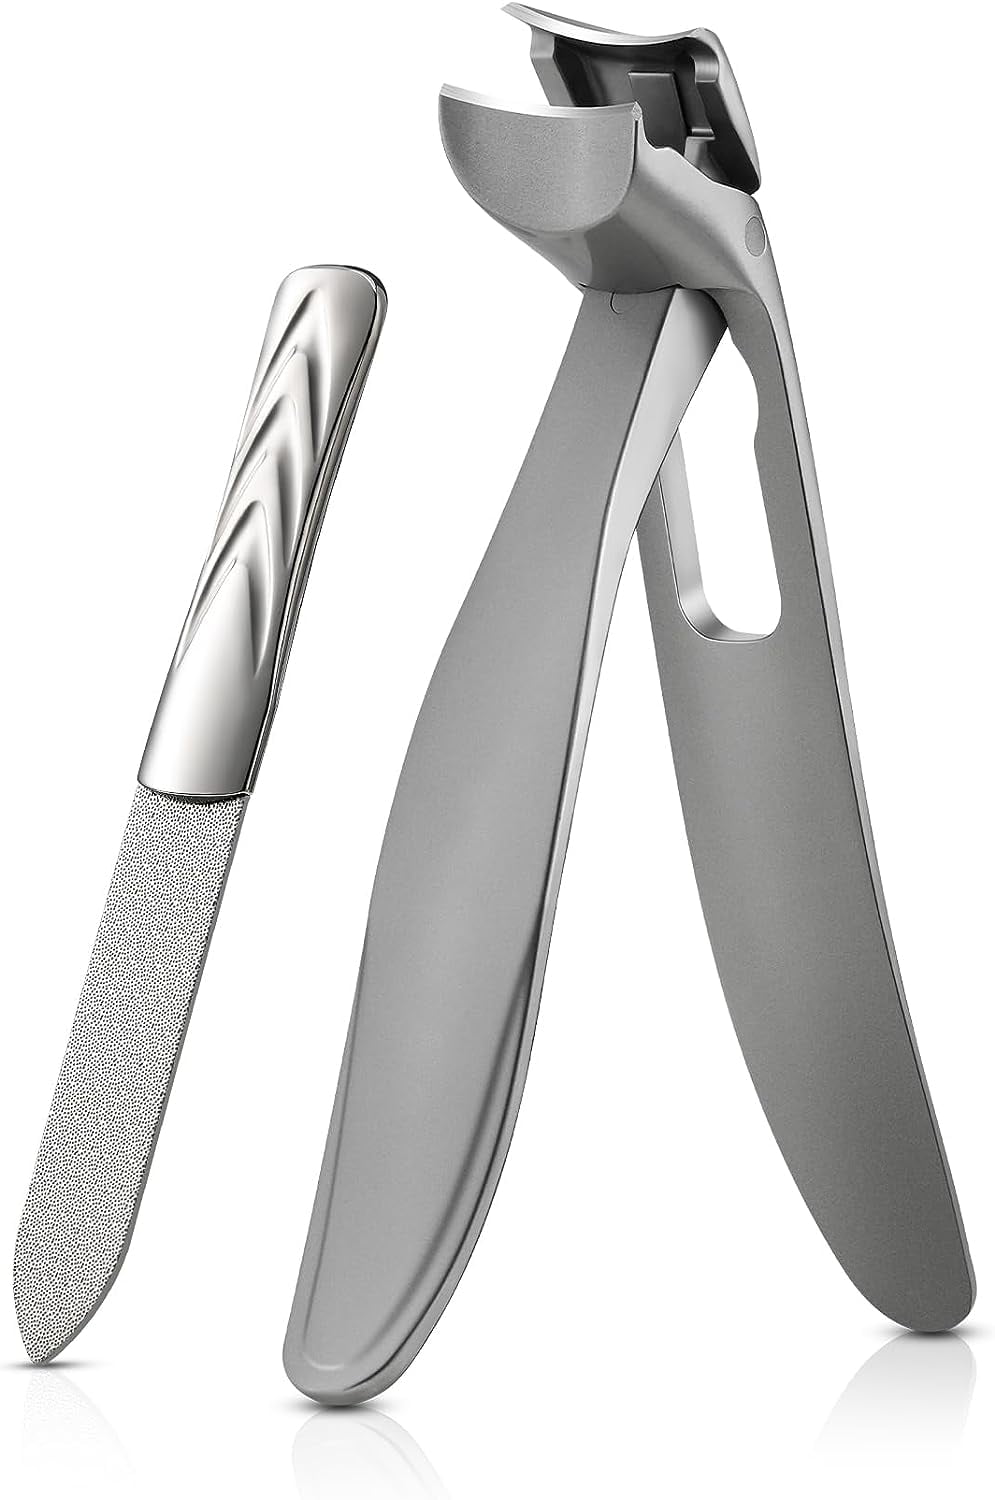 BEZOX Angled Head Nail Clippers for Seniors - Ergonomic Toenail Clipper for  Thick Nails, Premium Steel Nail Cutter Trimmer with Catcher for Men and